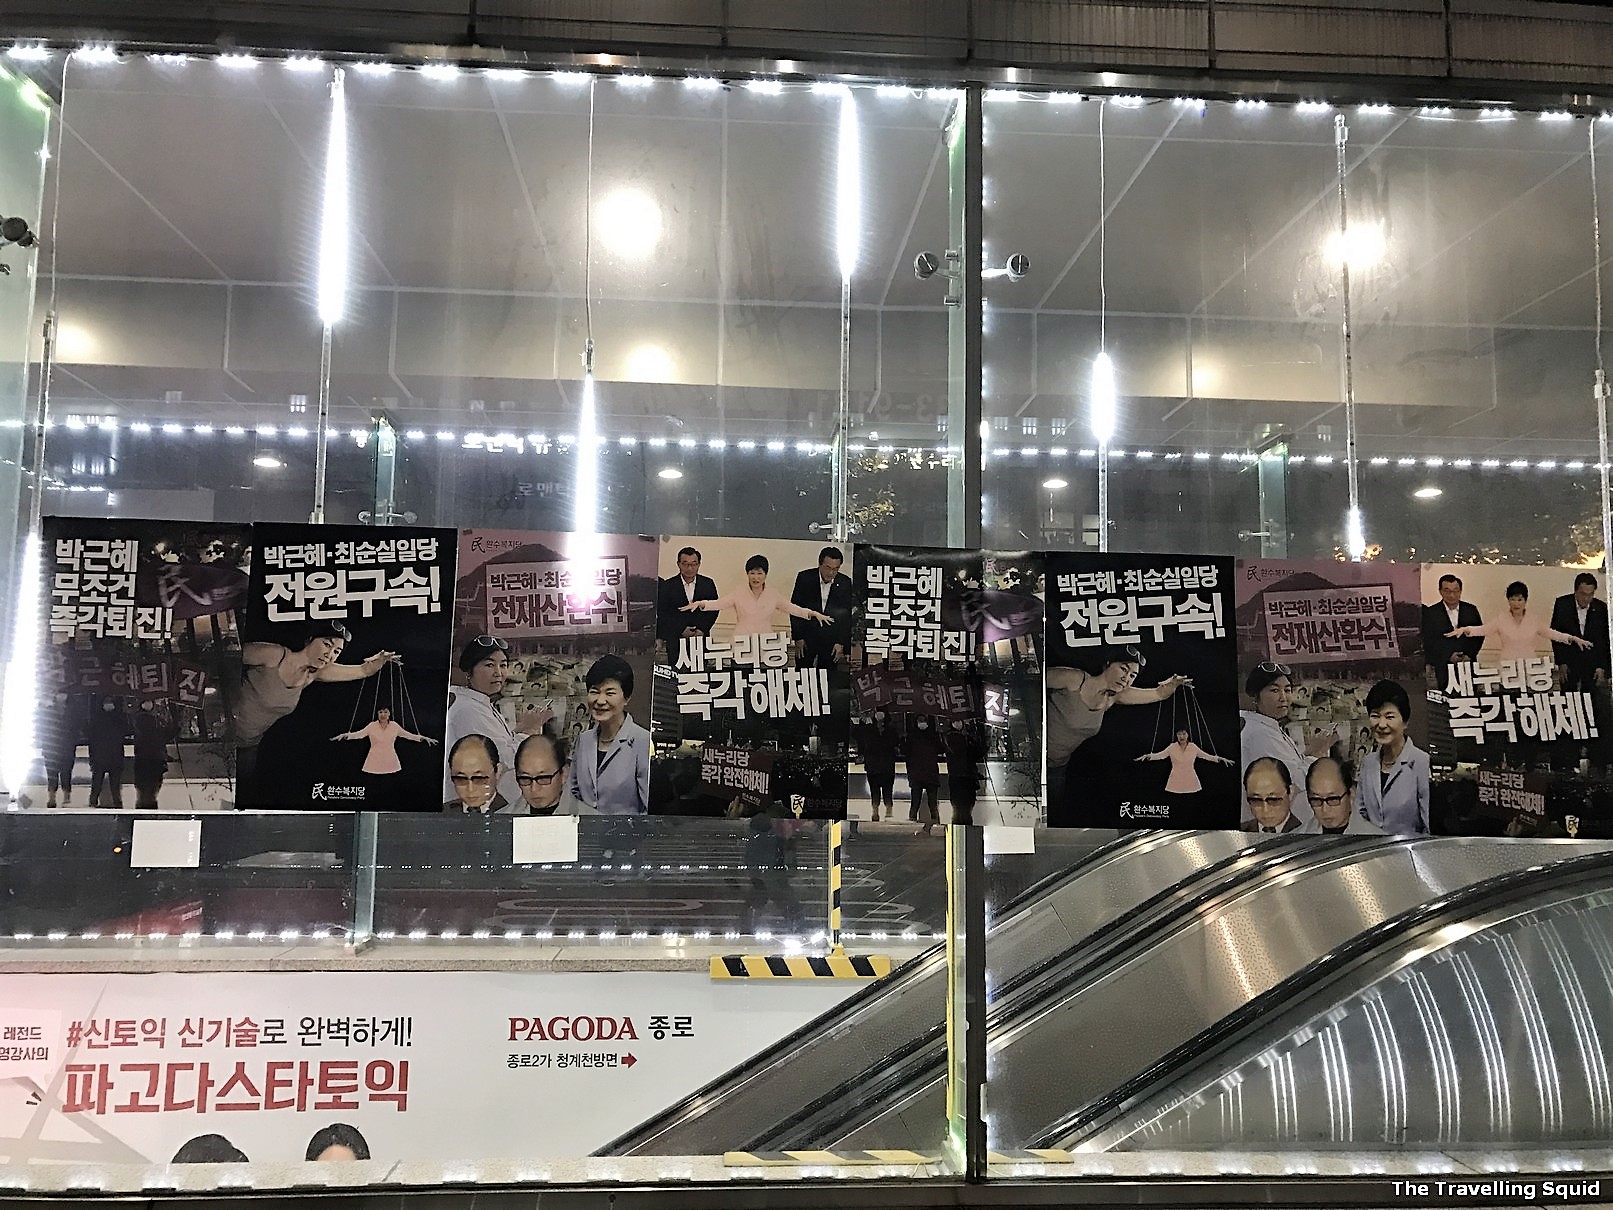 visit Seoul while protests are ongoing